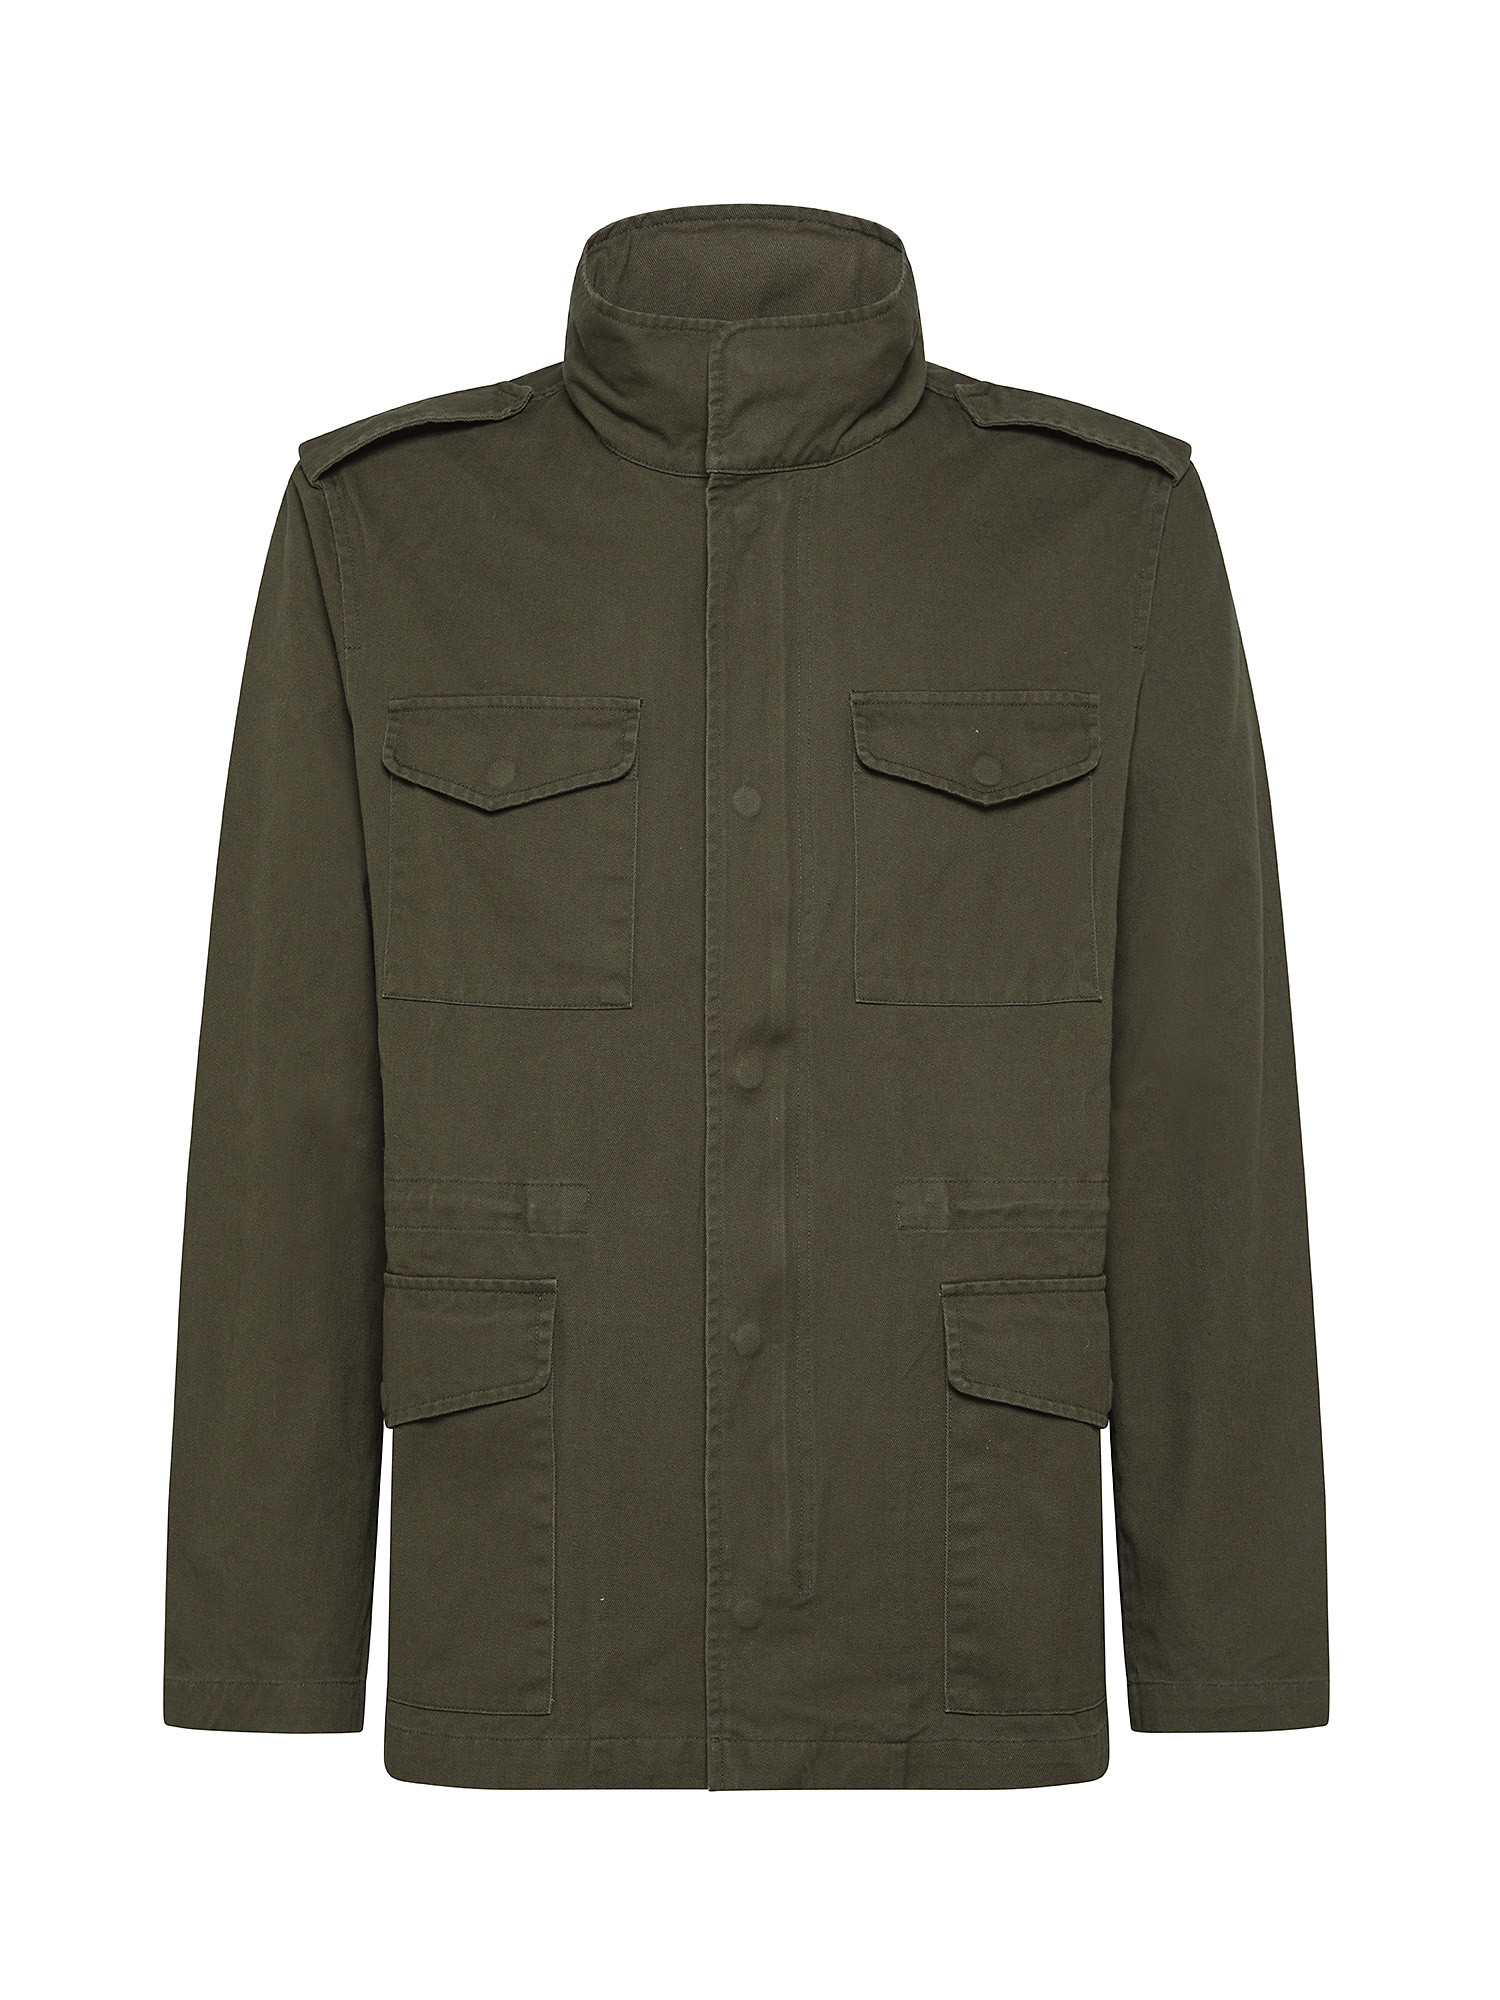 JCT - Jacket in pure cotton, Dark Green, large image number 0